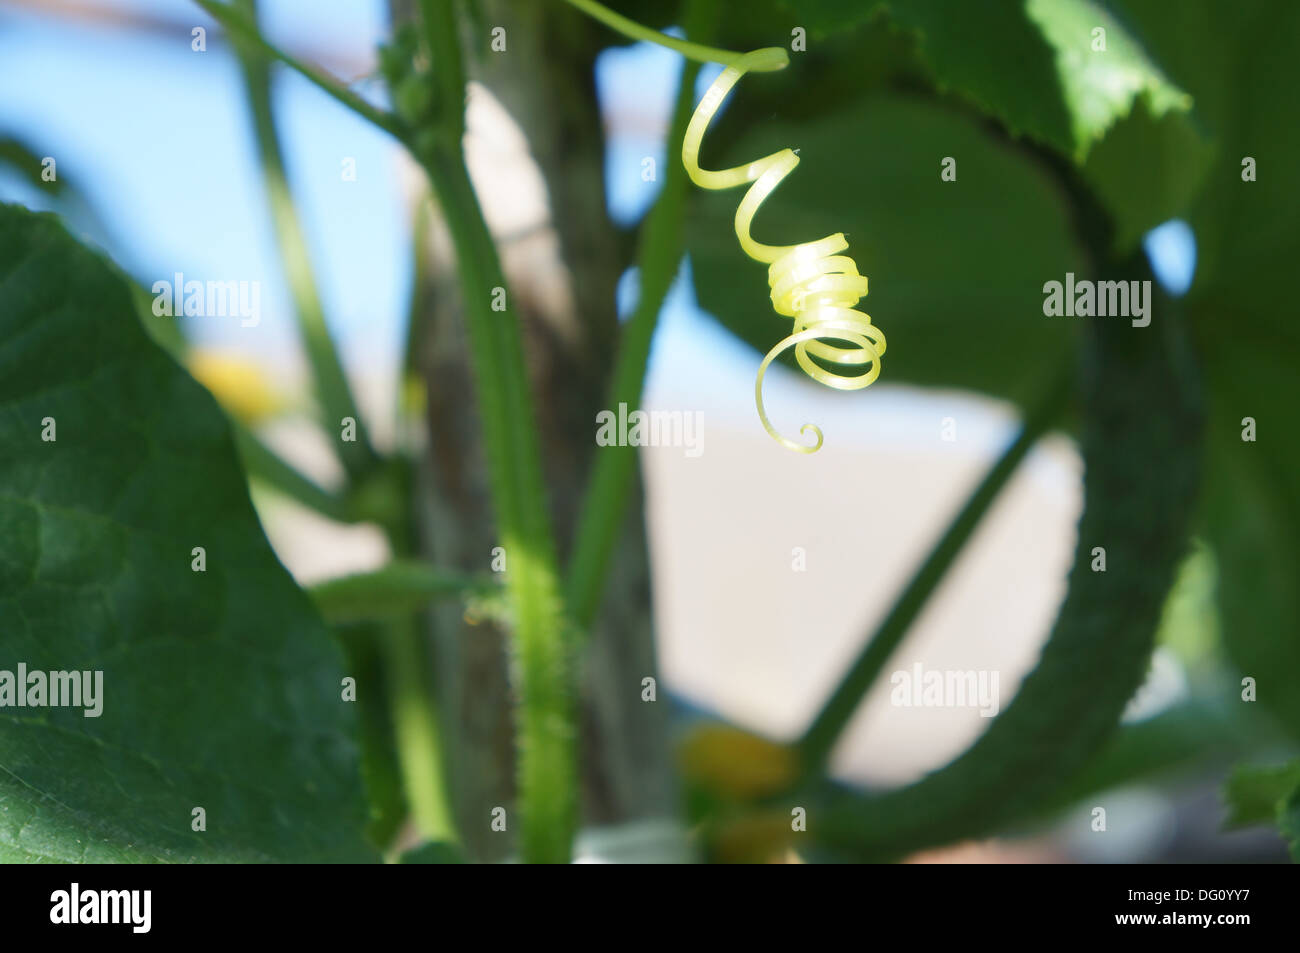 tendril on a cucumber plant Stock Photo